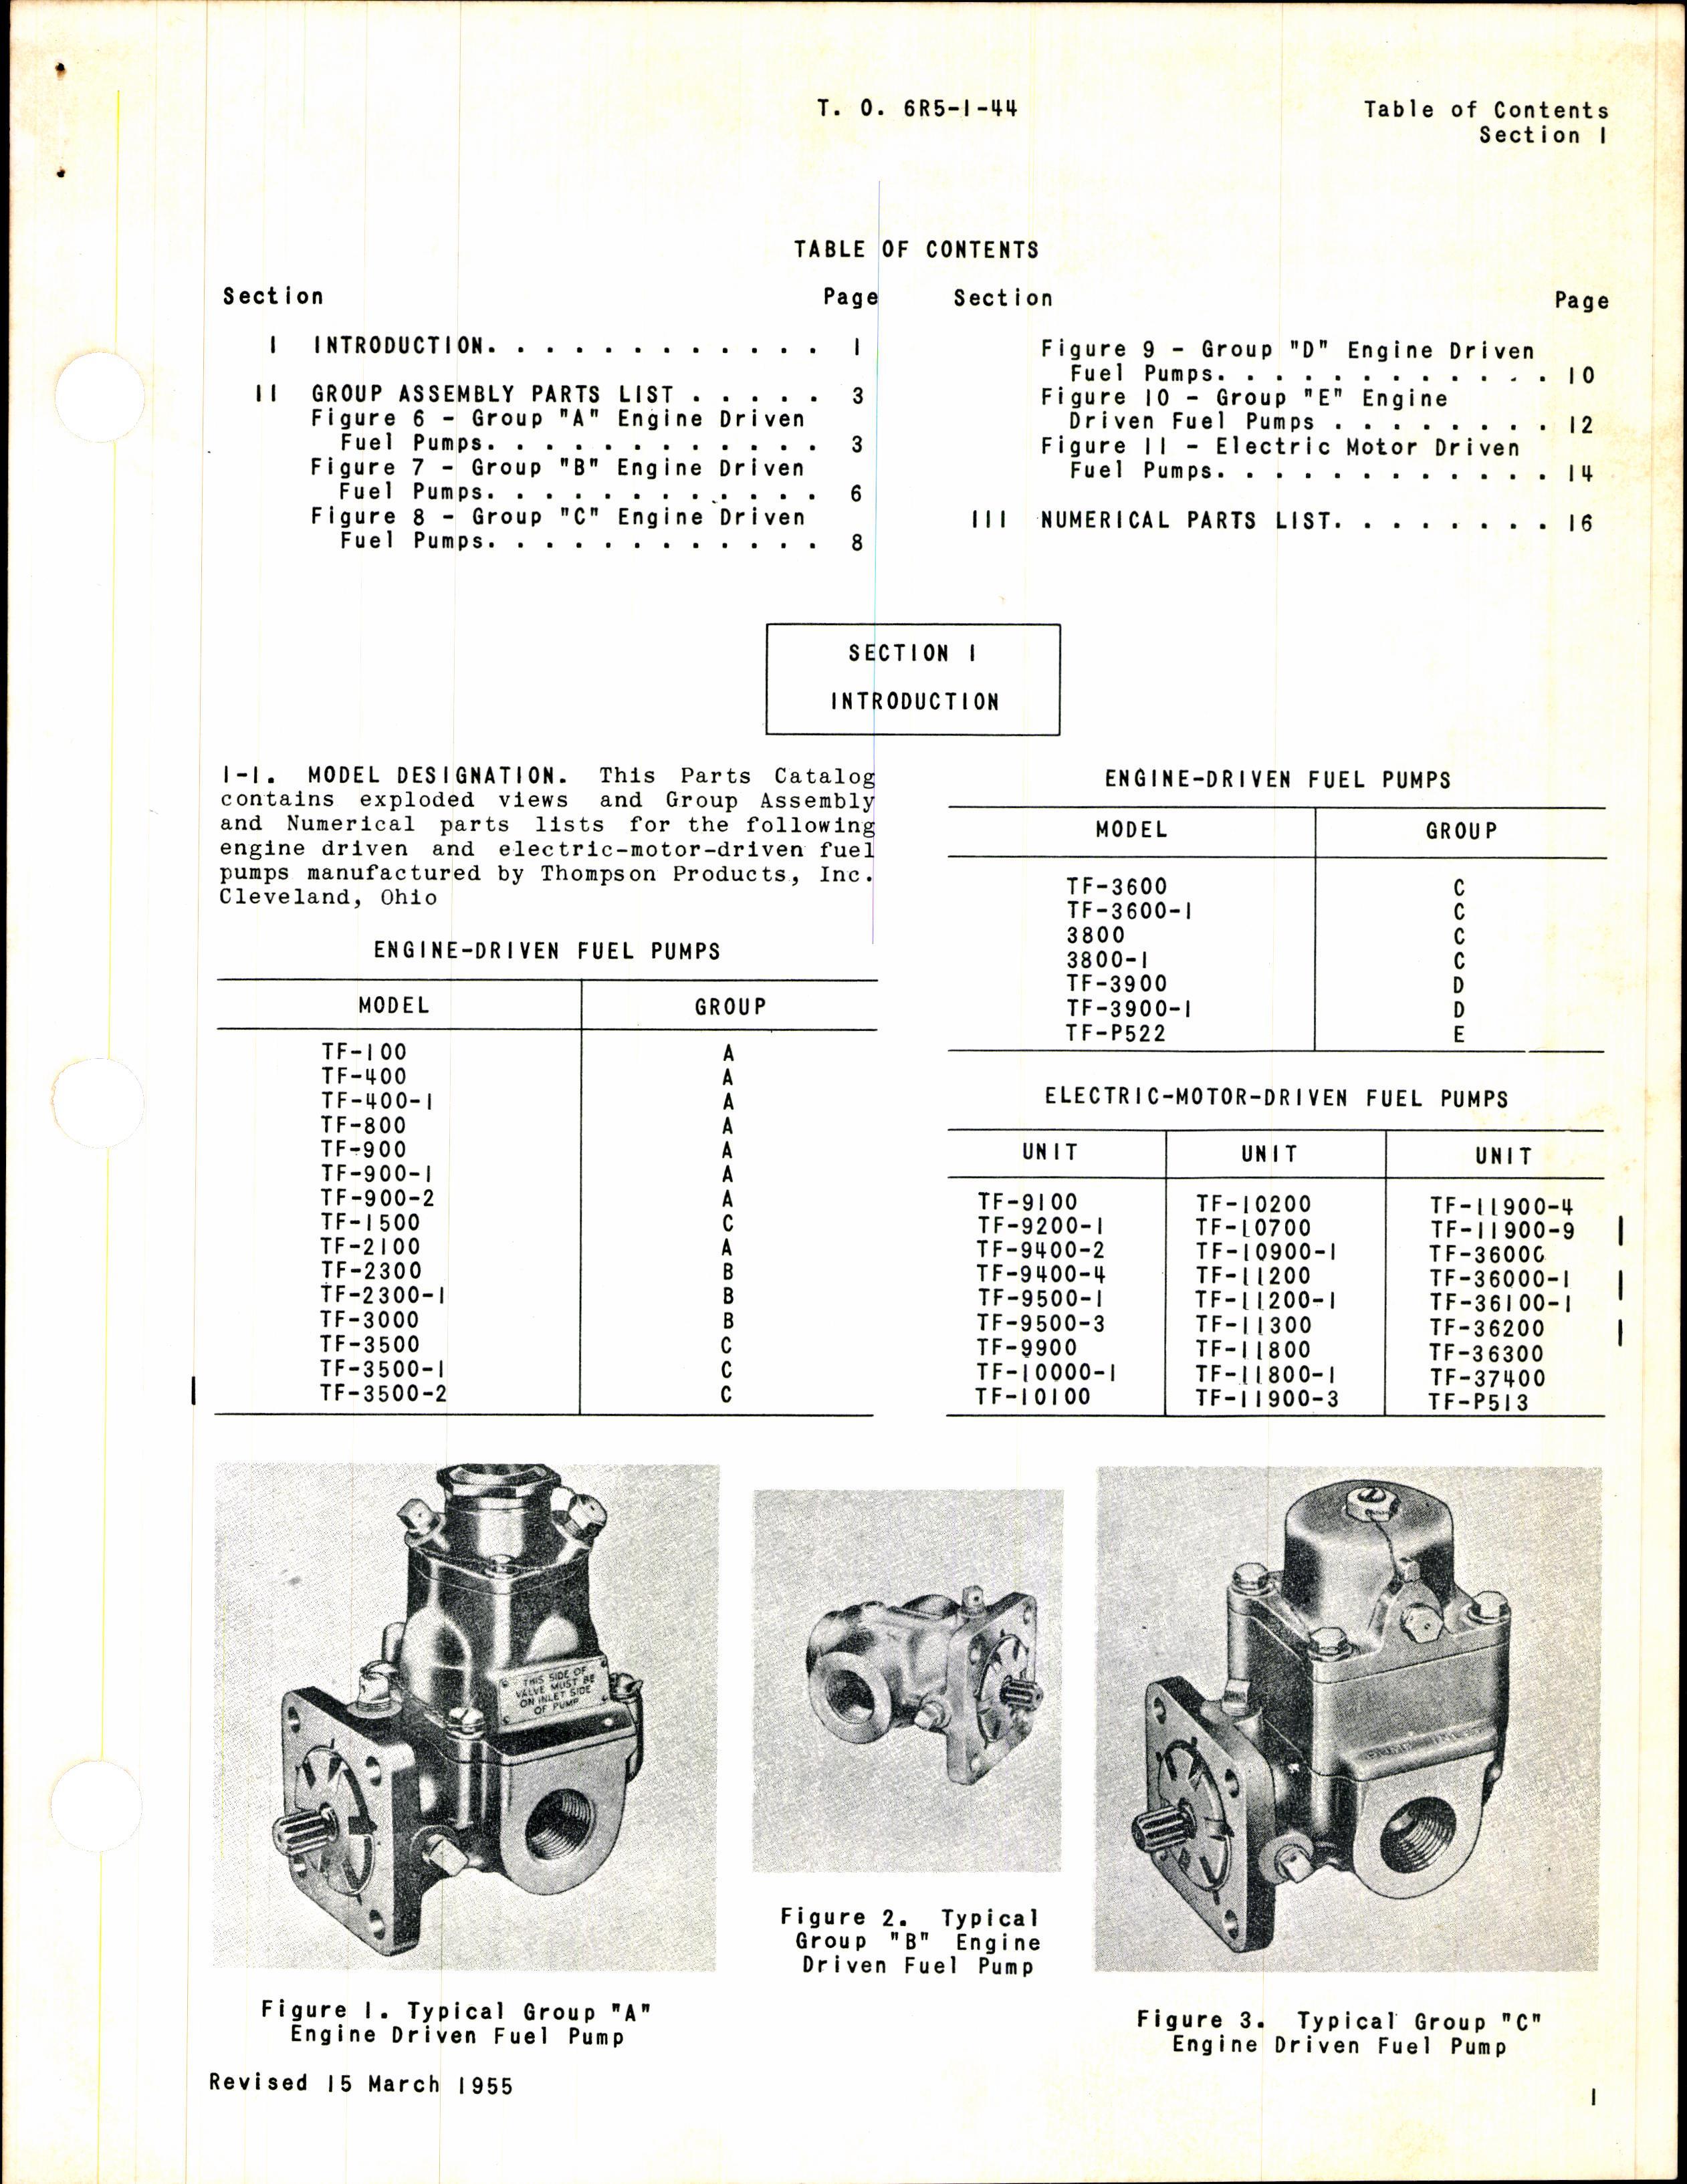 Sample page 3 from AirCorps Library document: Parts Catalog for Engine-Driven & Electric Motor Driven Thompson Fuel Pump